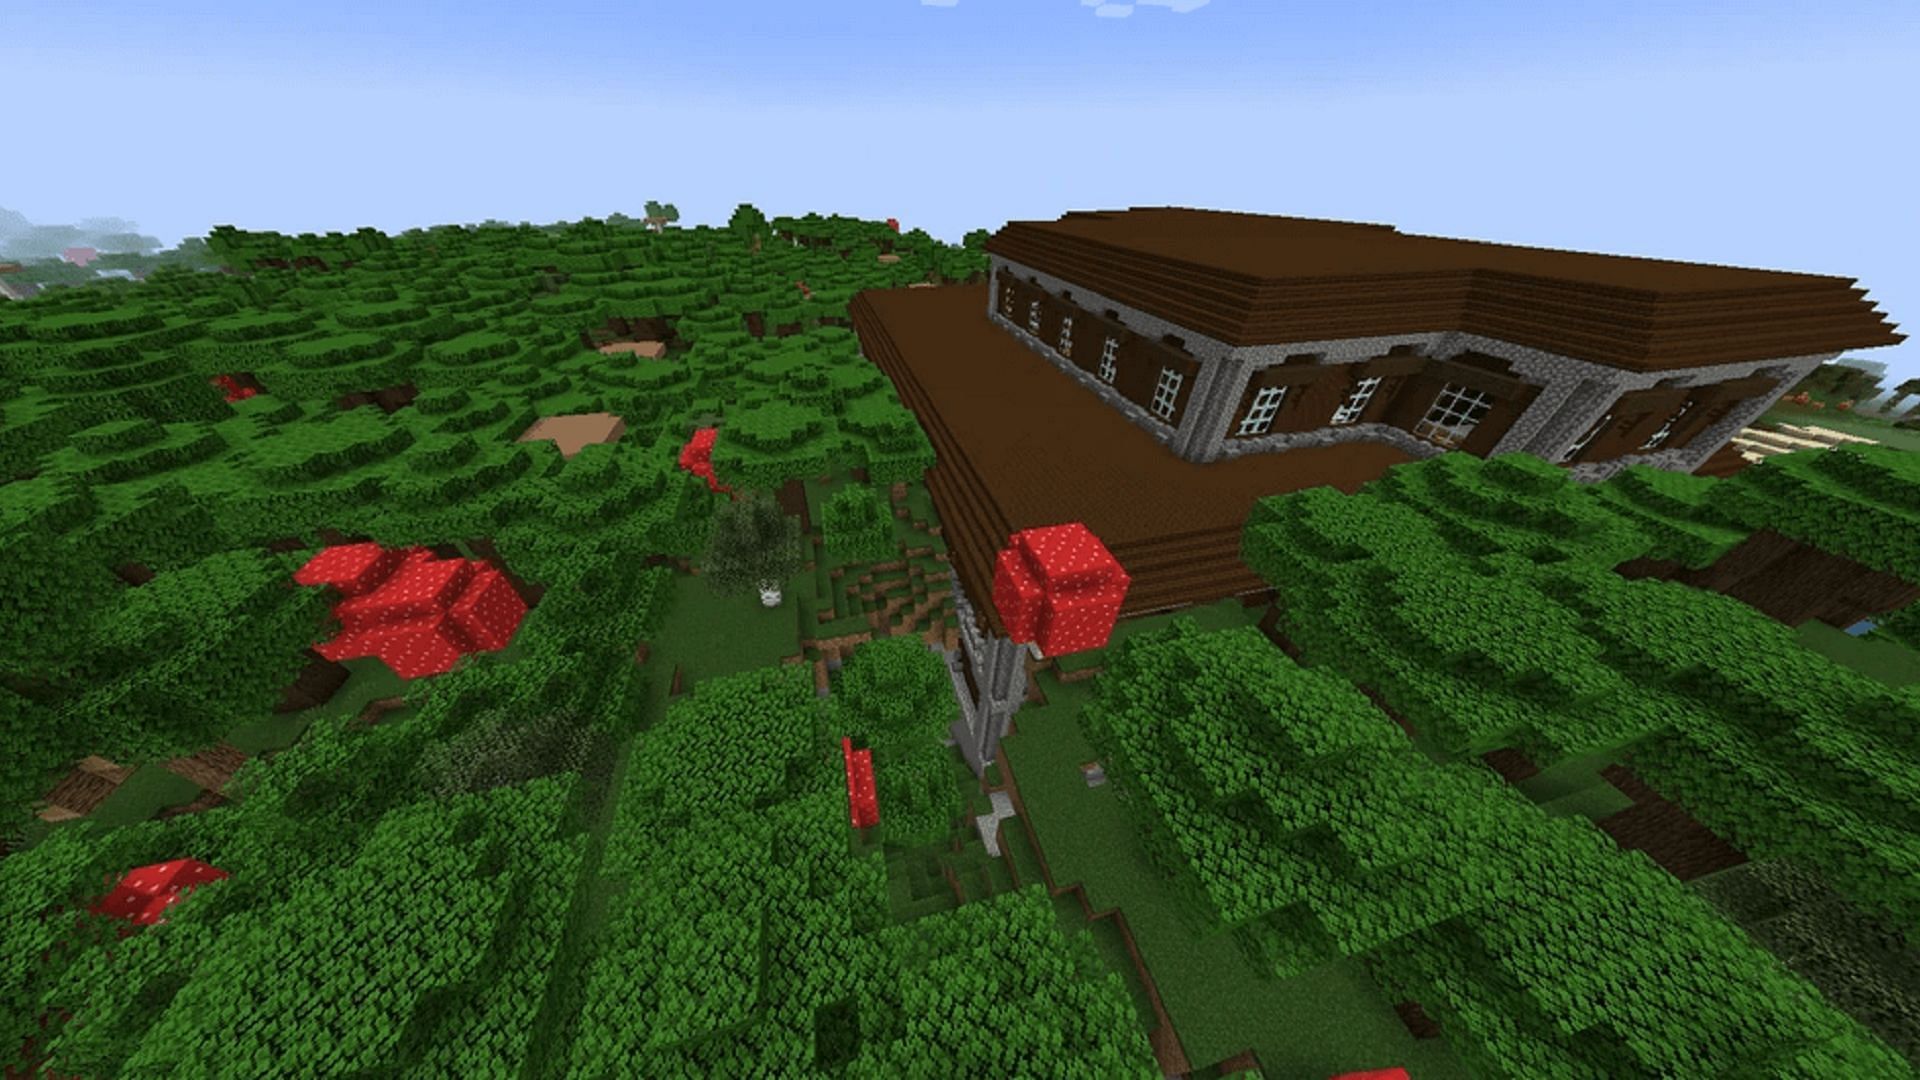 Dark forests can be spawning grounds for Minecraft&#039;s hostile mobs (Image via Mojang)